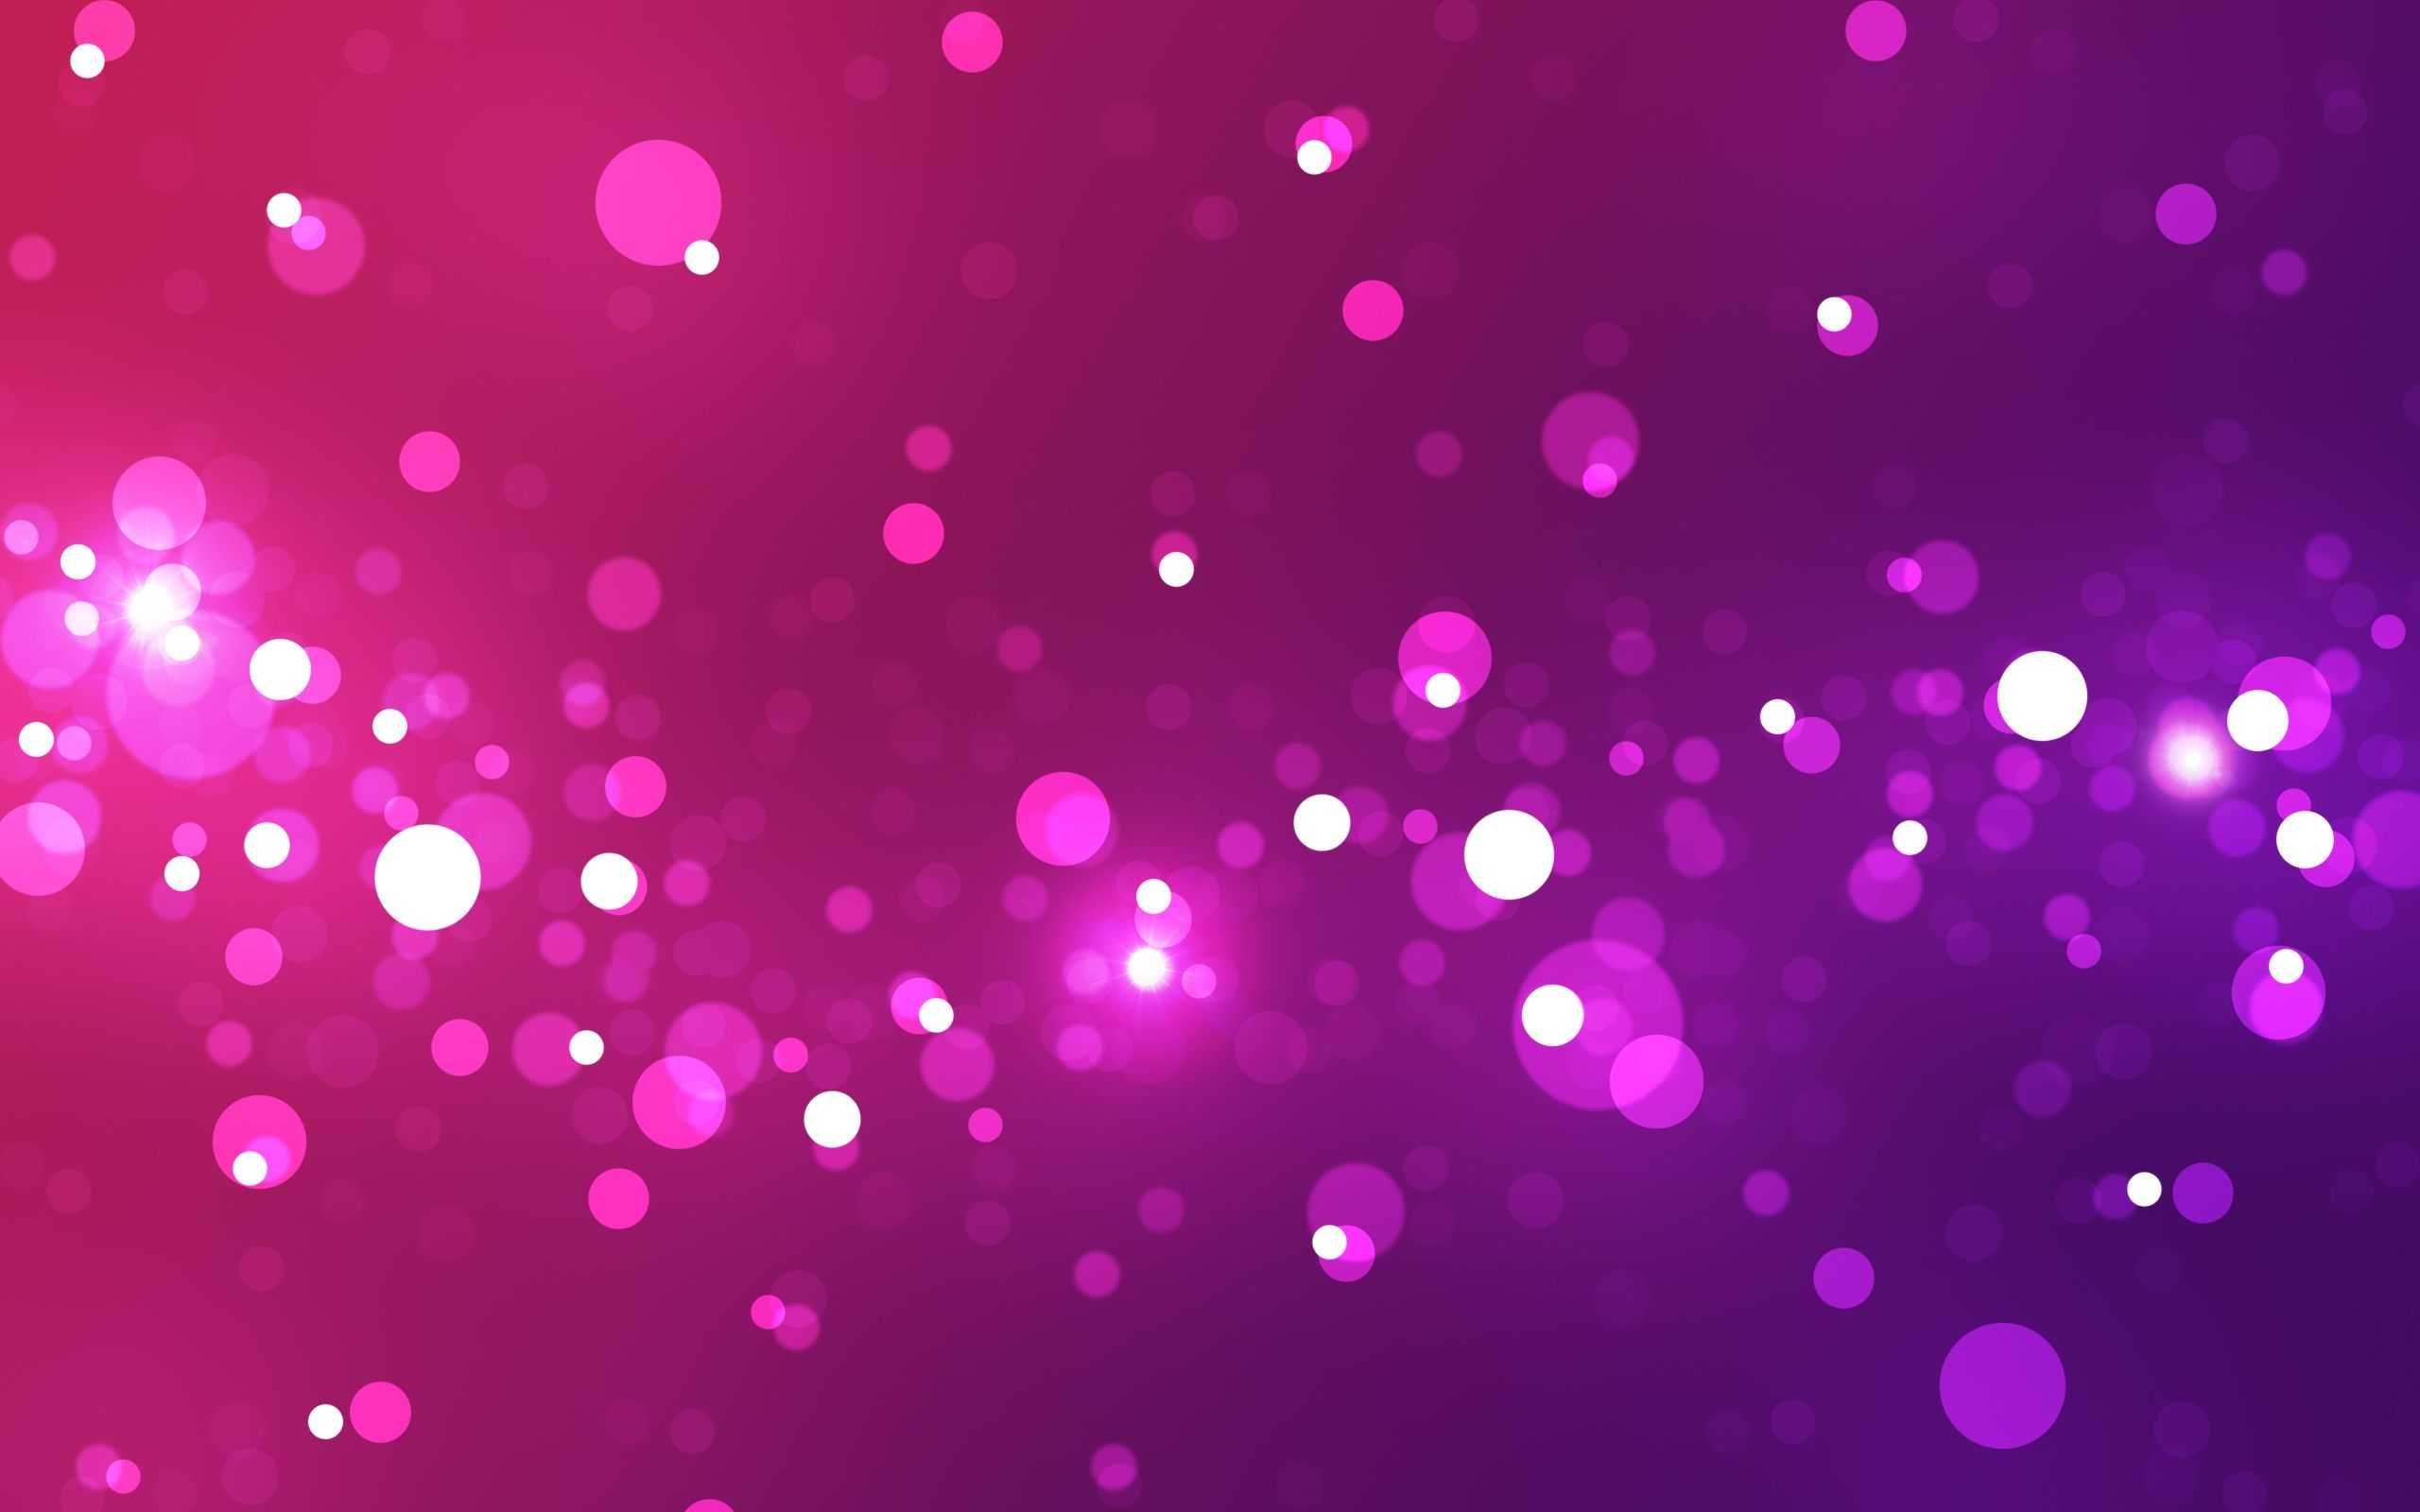 Pink Glitter Background Wallpaper Image For Free Download  Pngtree